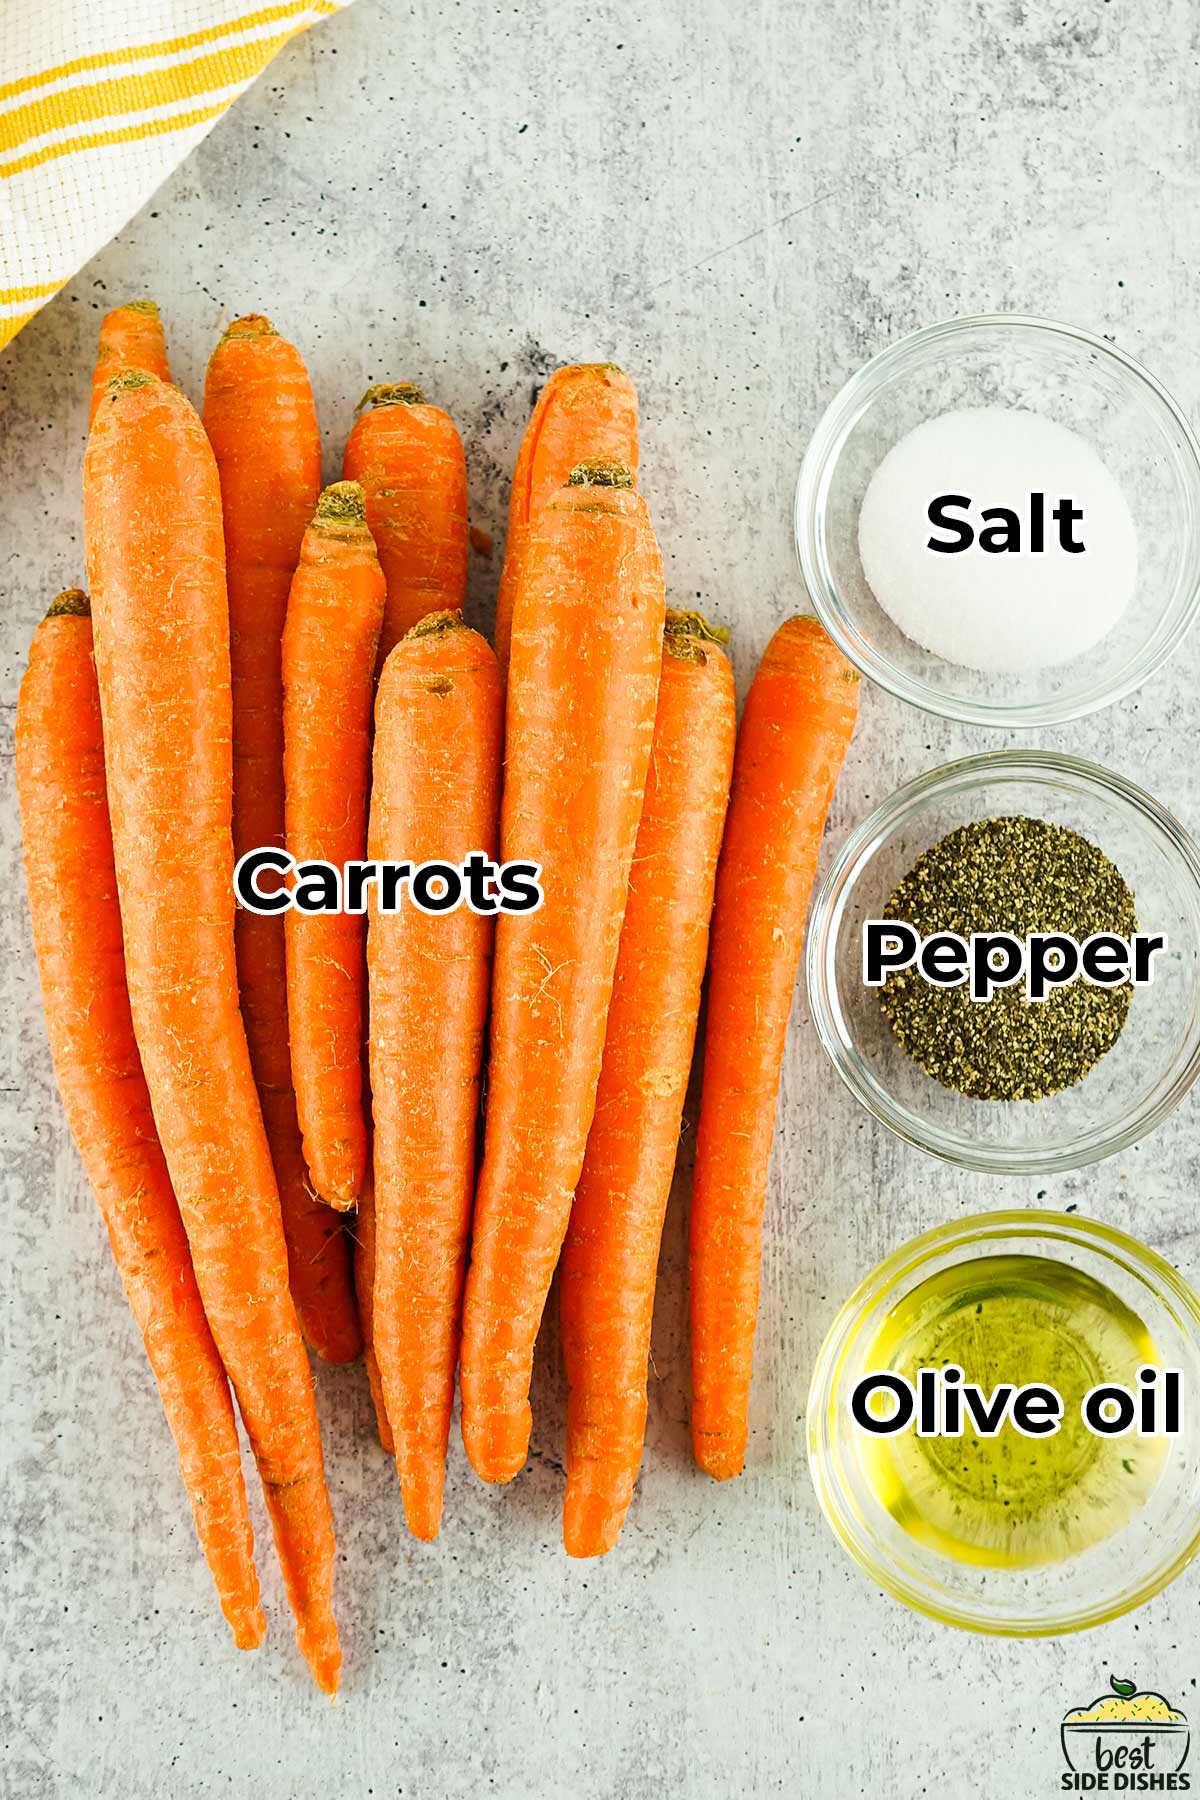 carrots, salt, pepper and oil in separate bowls on a granite table with labels